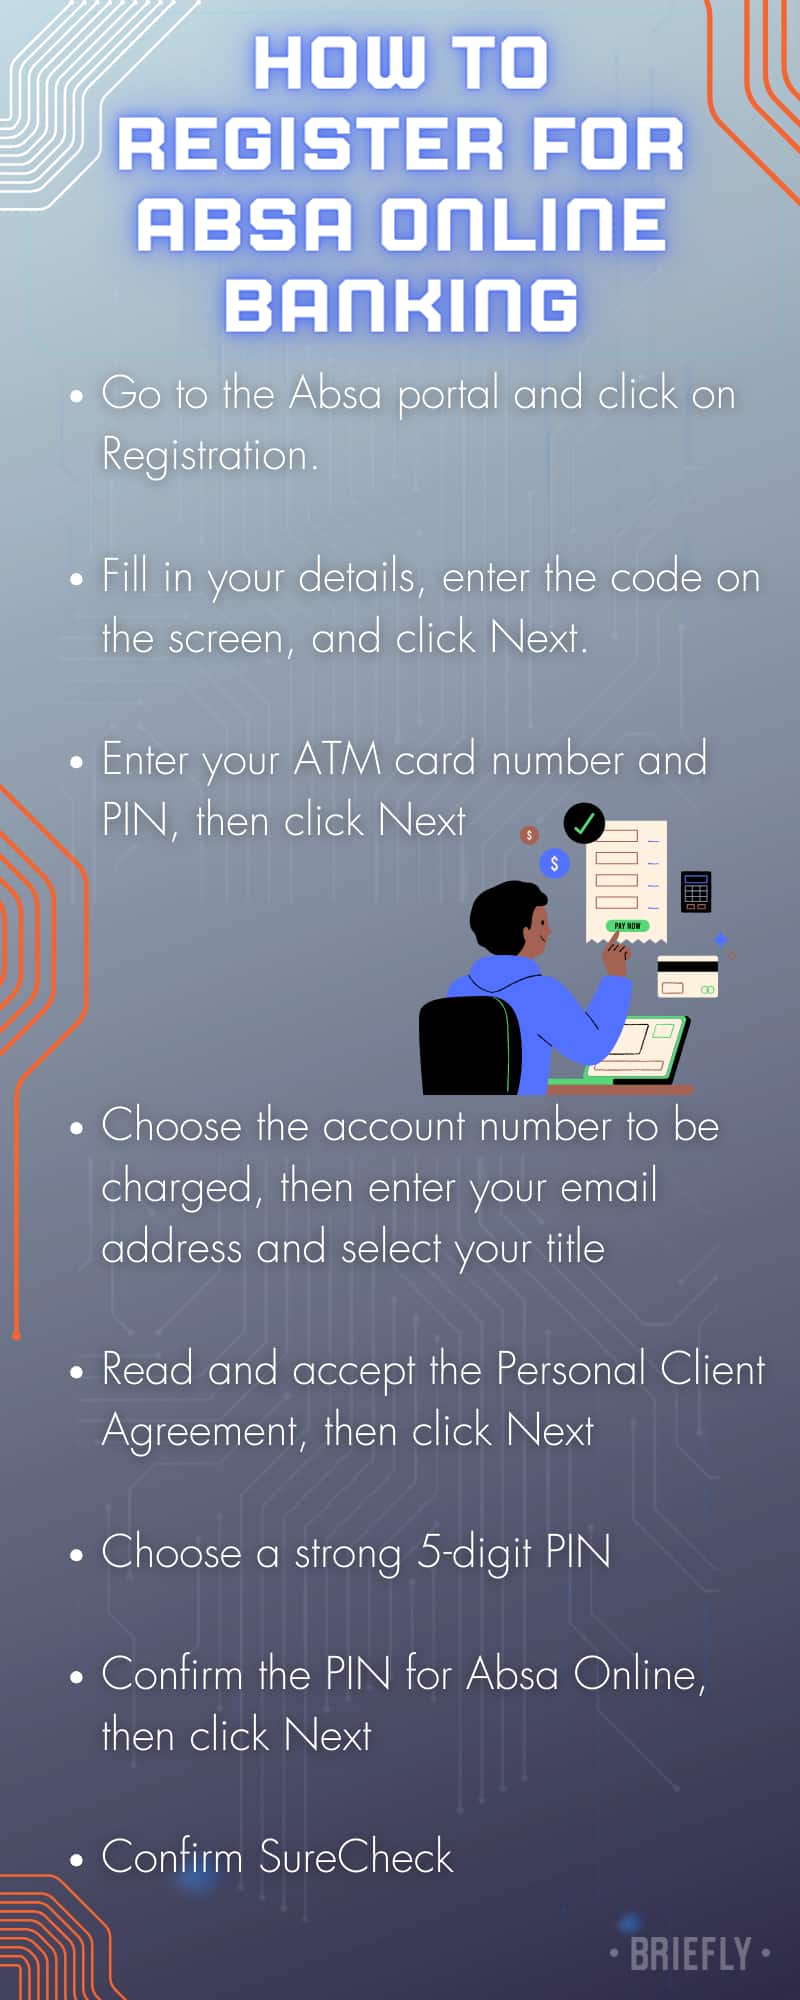 How to register for Absa online banking